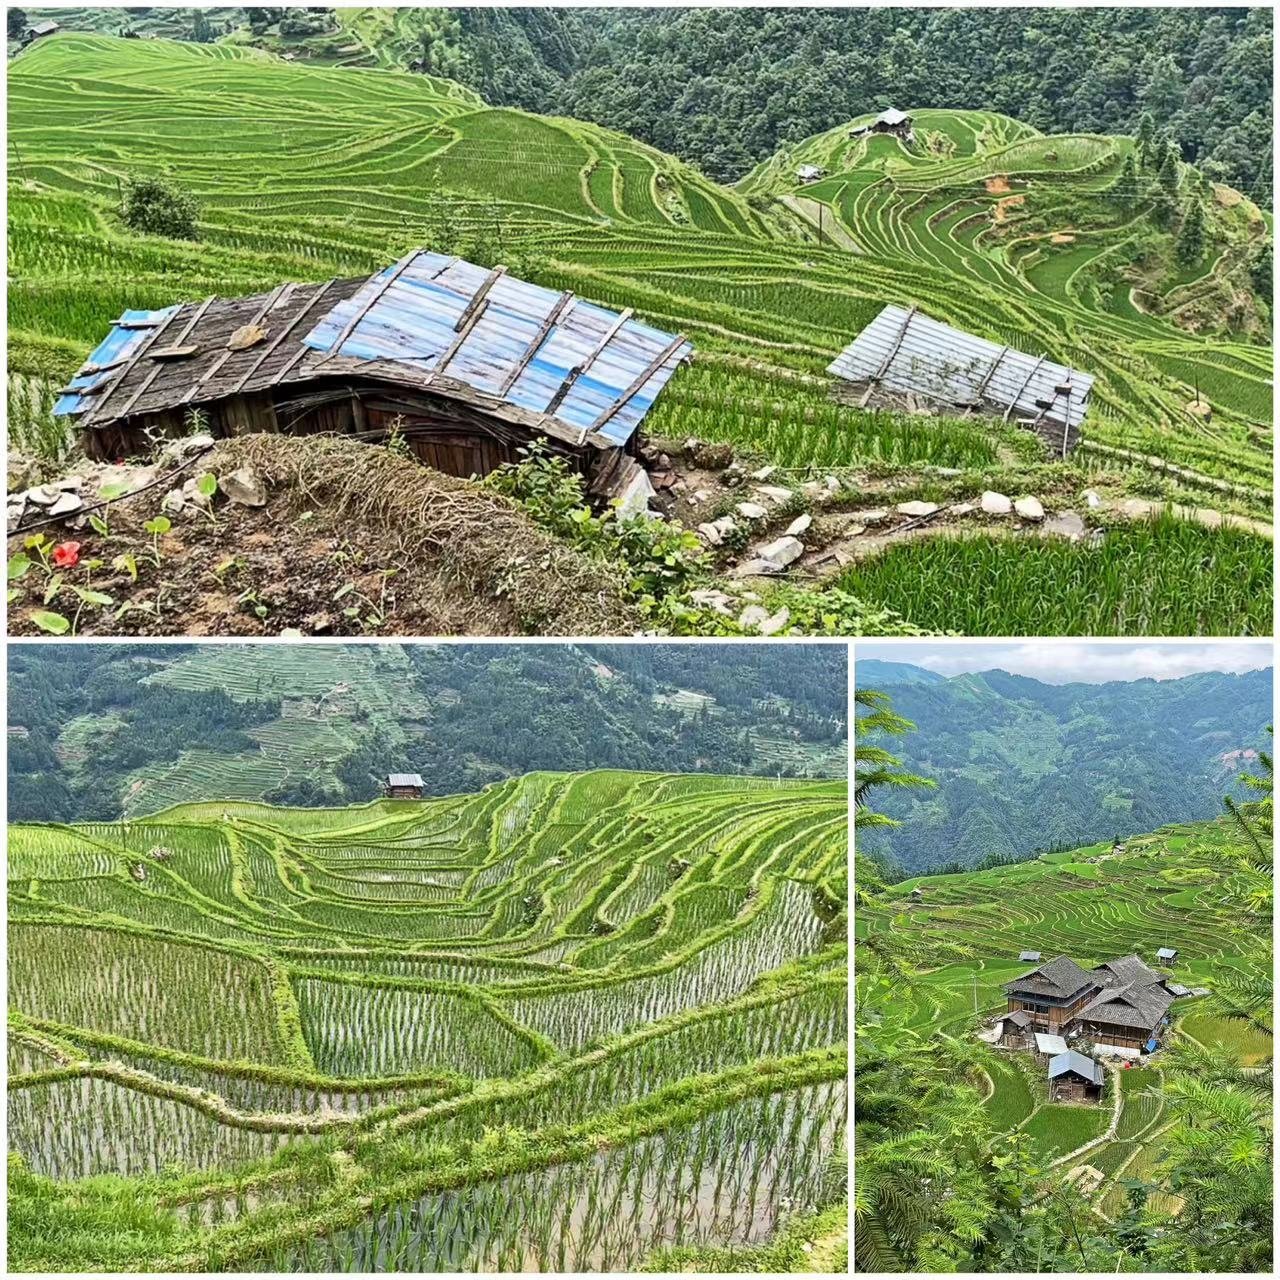 Chen Haoru: The stone pathways that connect rice paddies are just one example of how architecture has always been an integral part of agriculture.